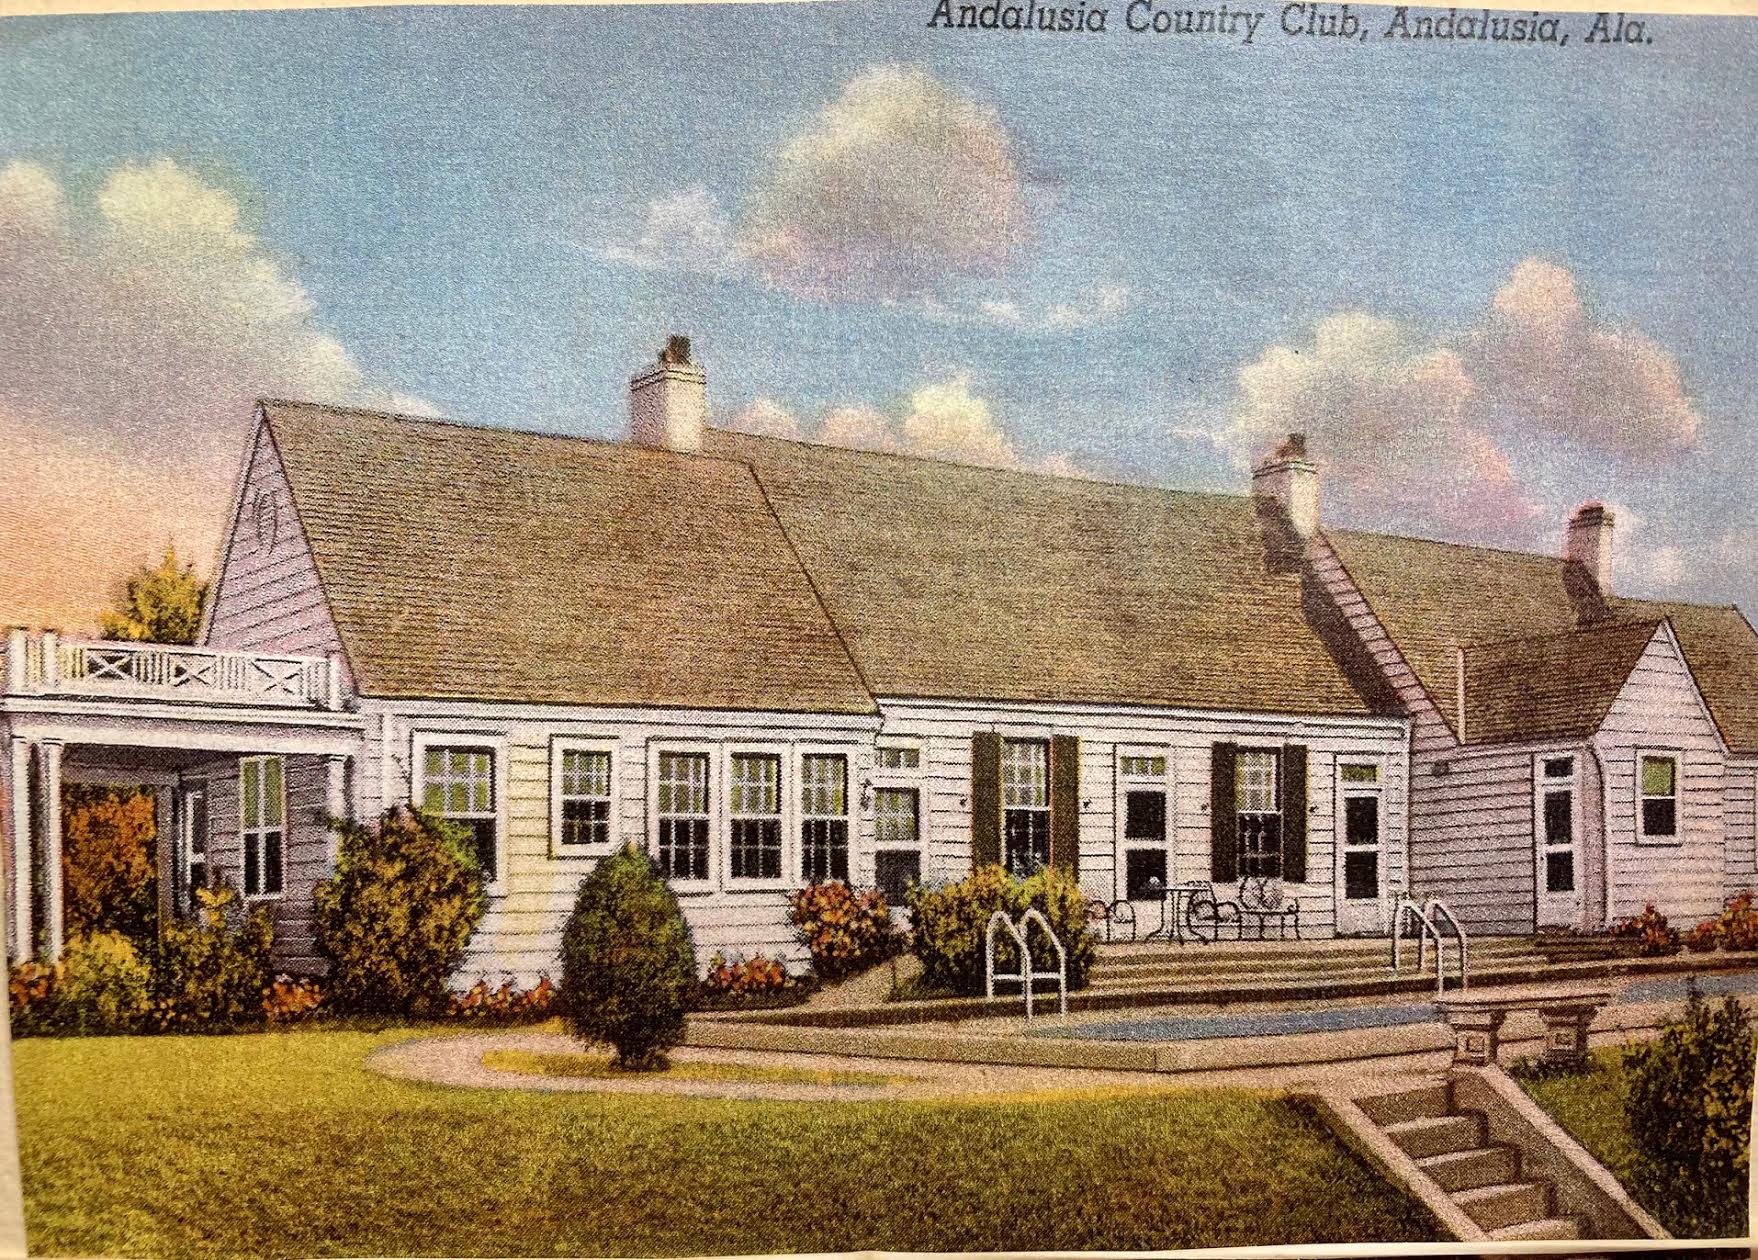 REMEMBER WHEN: The Story of the Andalusia Country Club - The Andalusia